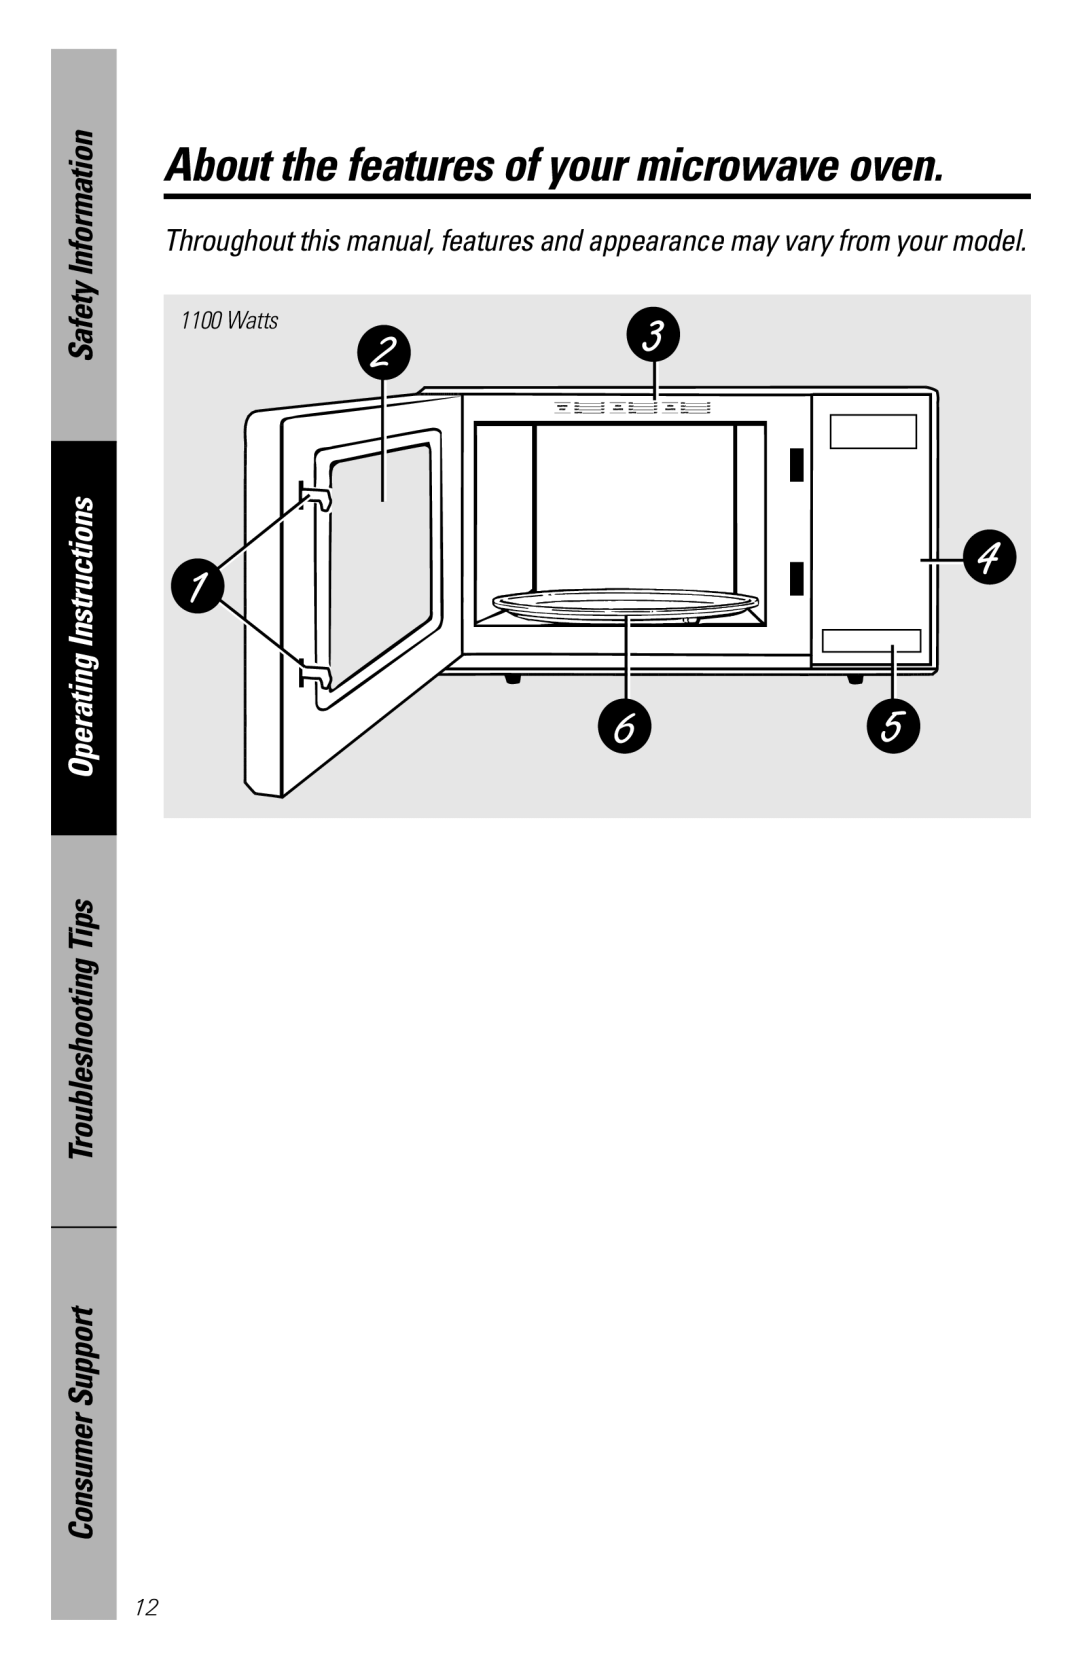 GE WES1130 owner manual About the features of your microwave oven, Safety Information, Operating Instructions 